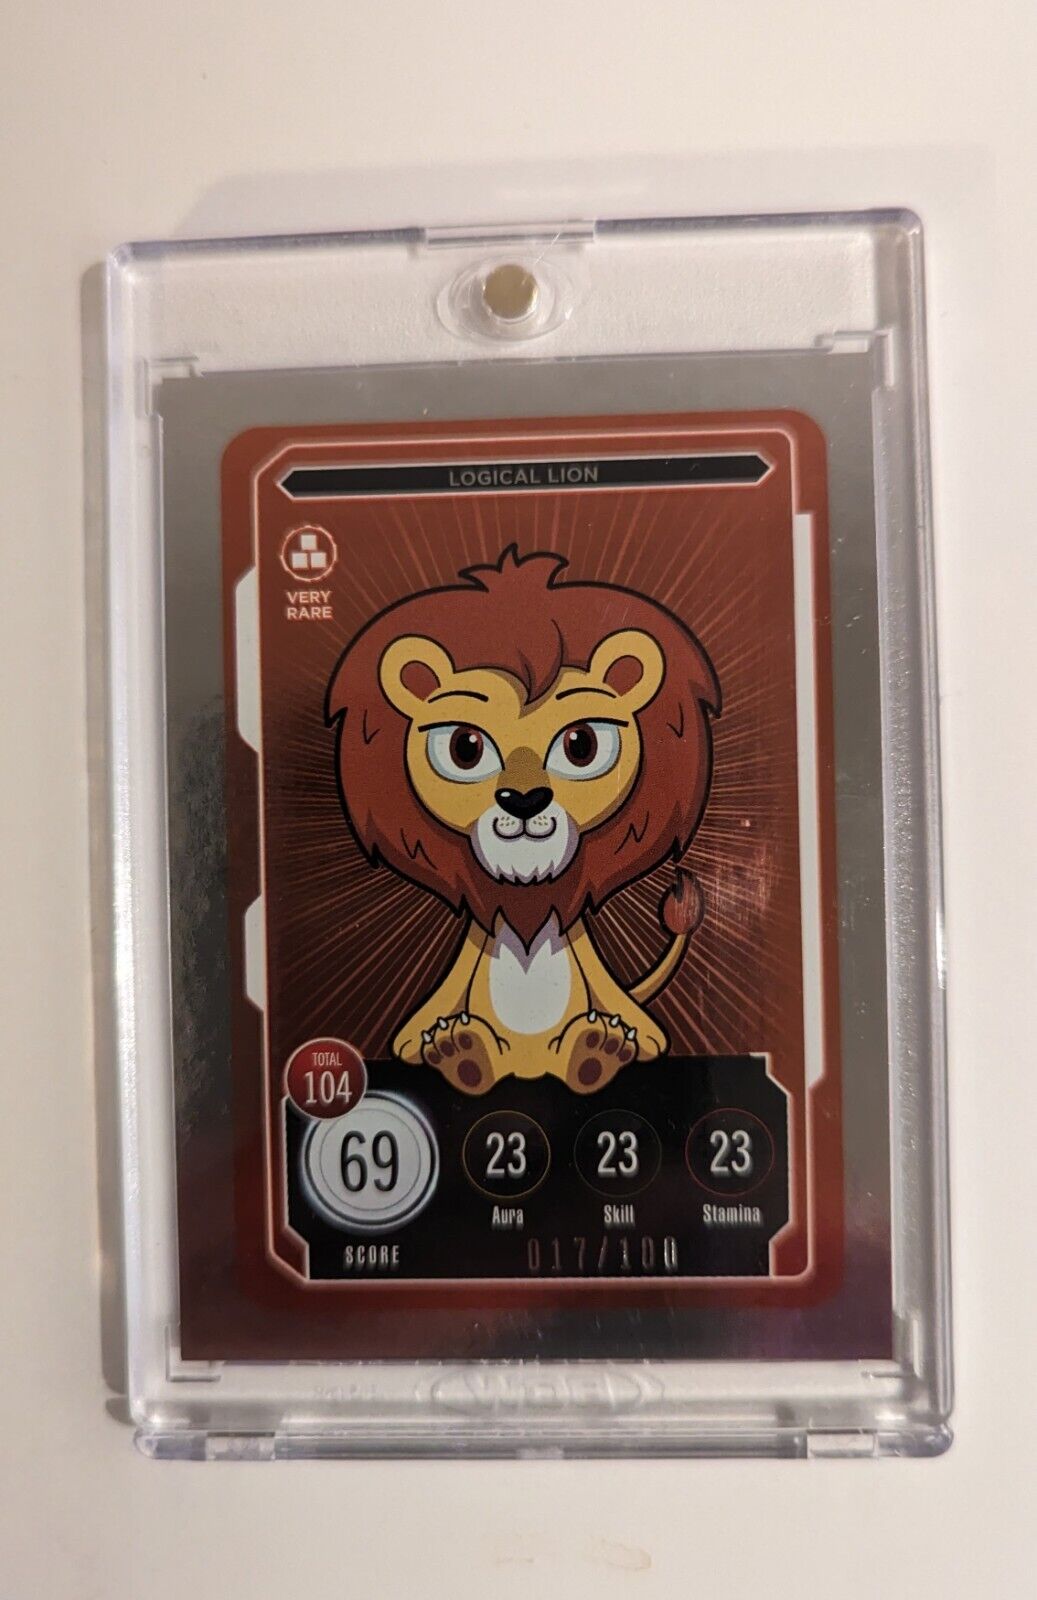 VERY RARE LOGICAL LION 17/100 Trading Card Compete Collect Zerocool GARY VEE